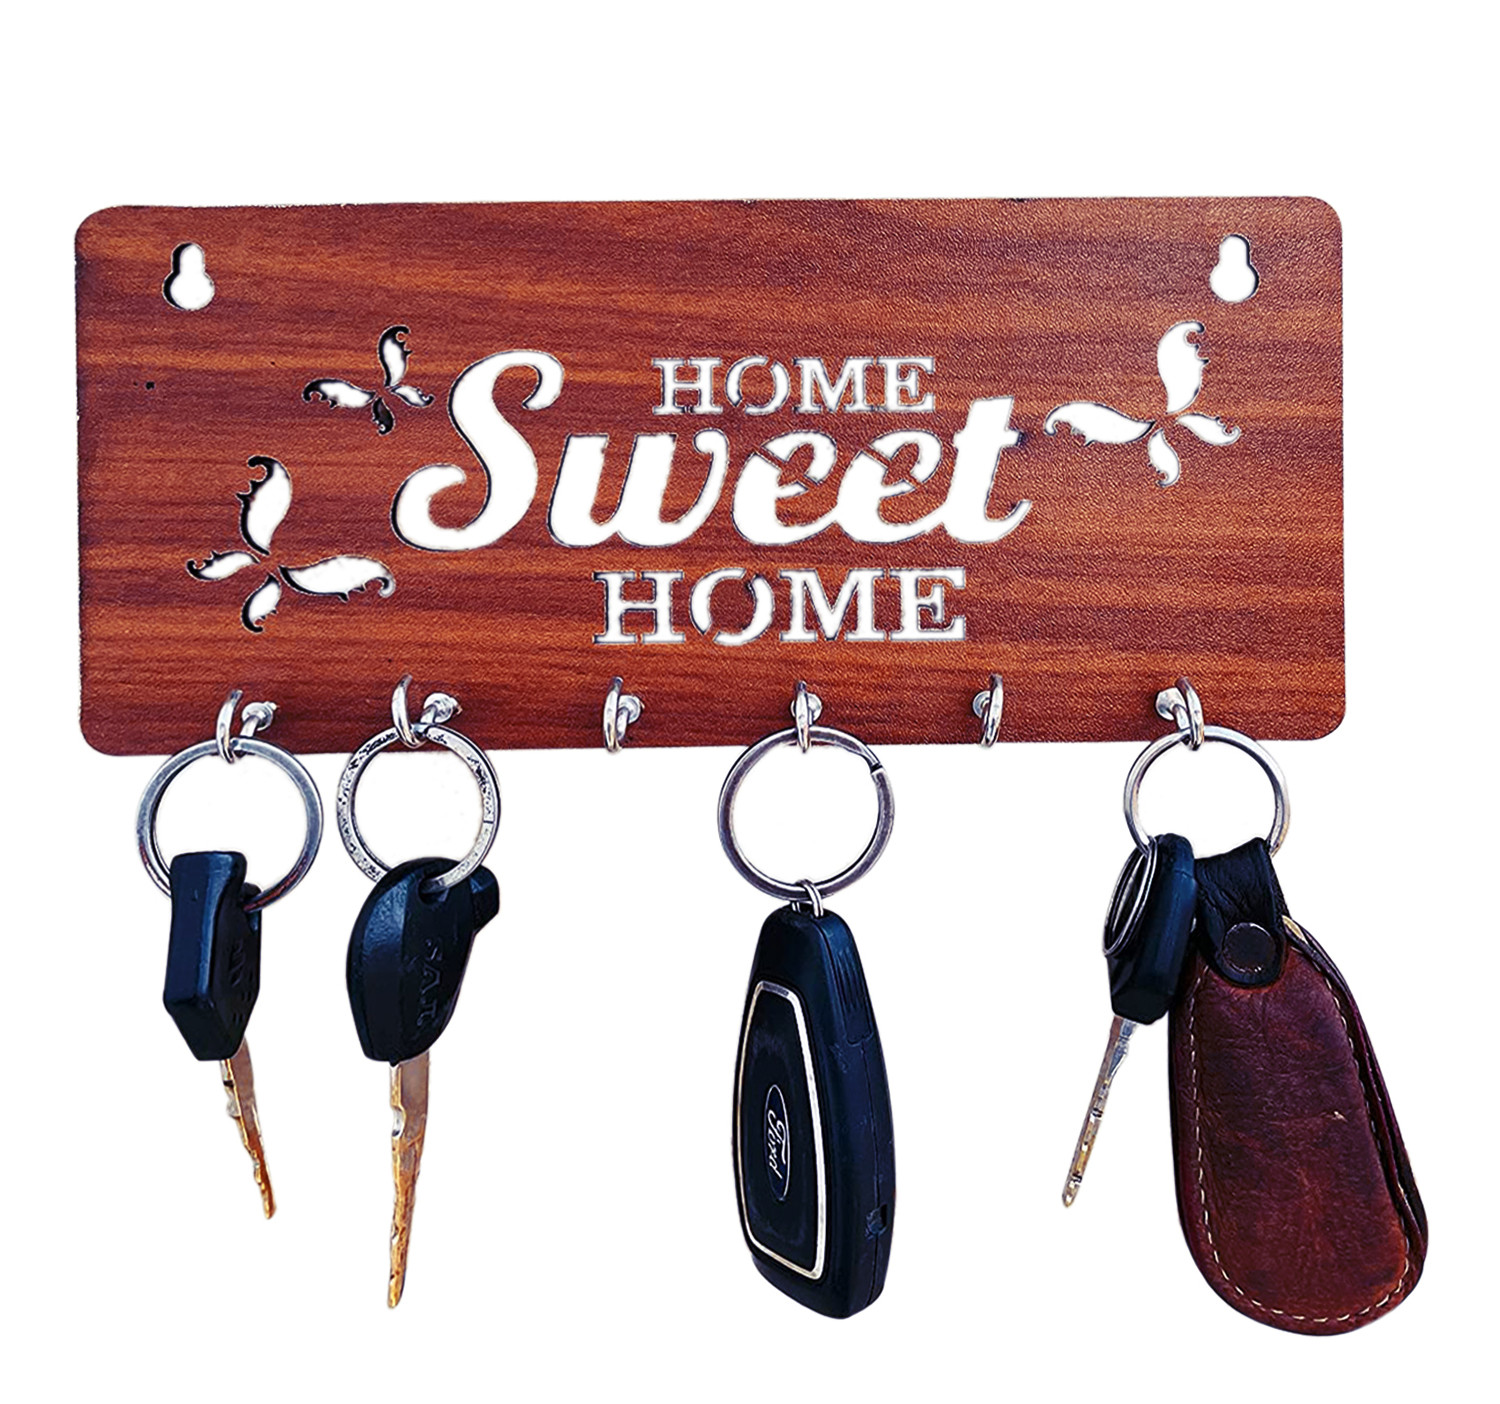 Kuber Industries Wood Sweet Home Design 7 Hooks Mounted Key Holder for Wall & Home Decor (Brown)